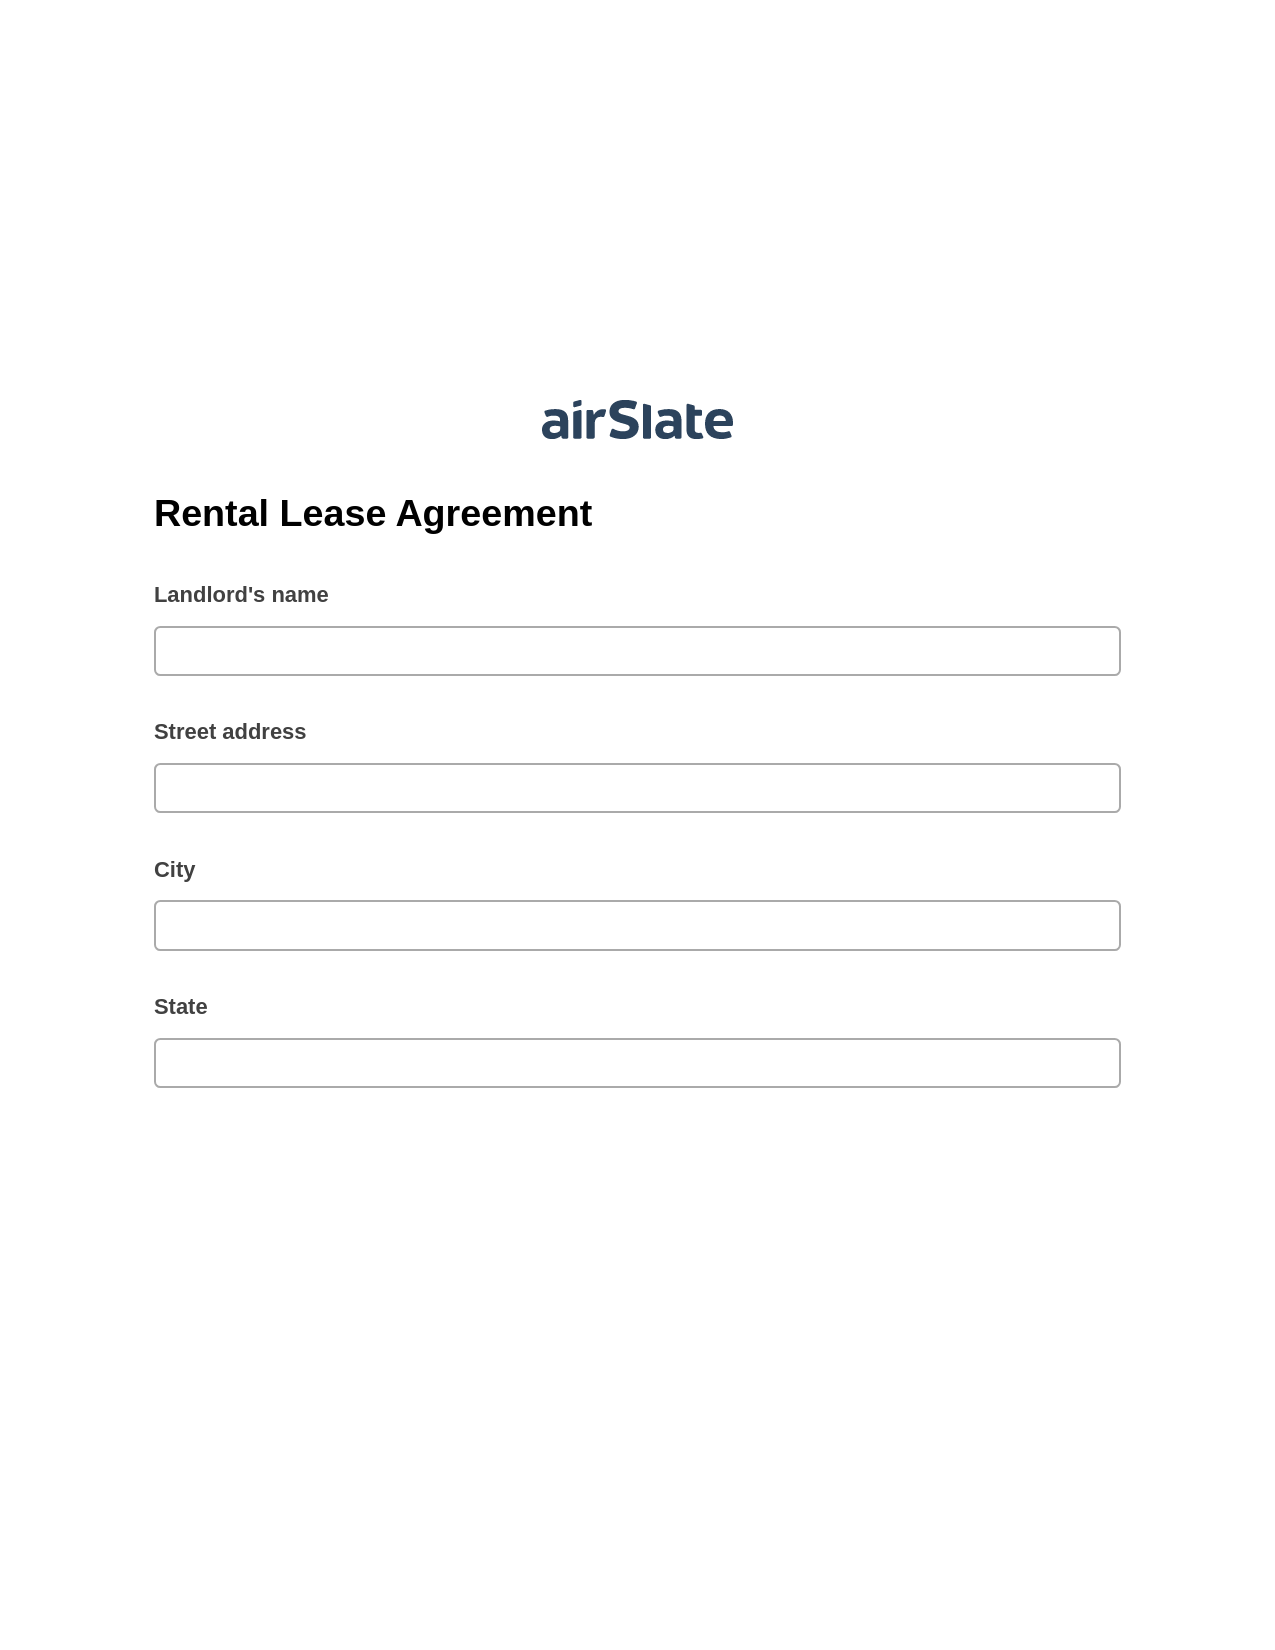 Rental Lease Agreement System Bot - Slack Two-Way Binding Bot, Create NetSuite Records Bot, Post-finish Document Bot